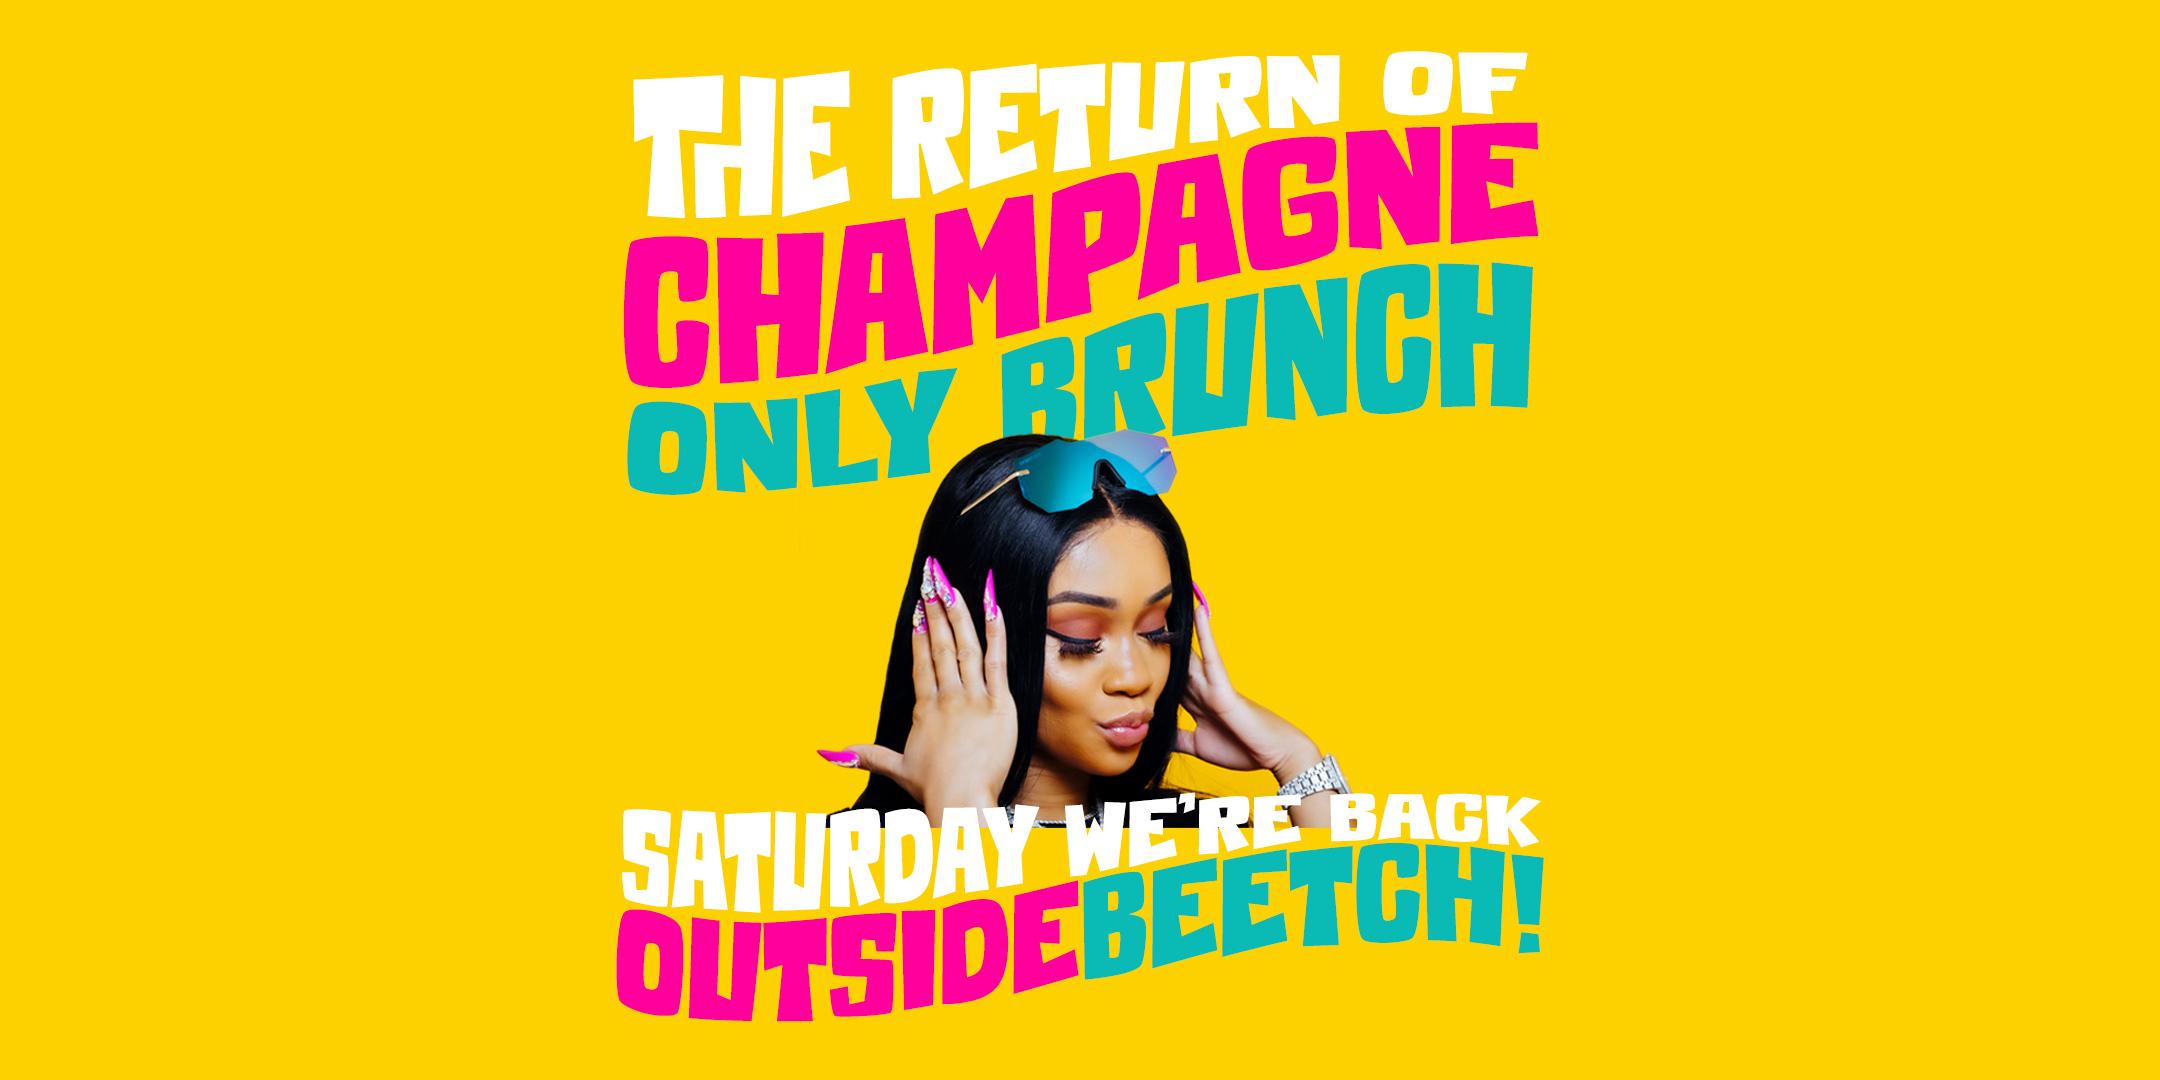 CHAMPAGNE ONLY BRUNCH: Every Saturday at Brooklyn on U: A Party Brunch